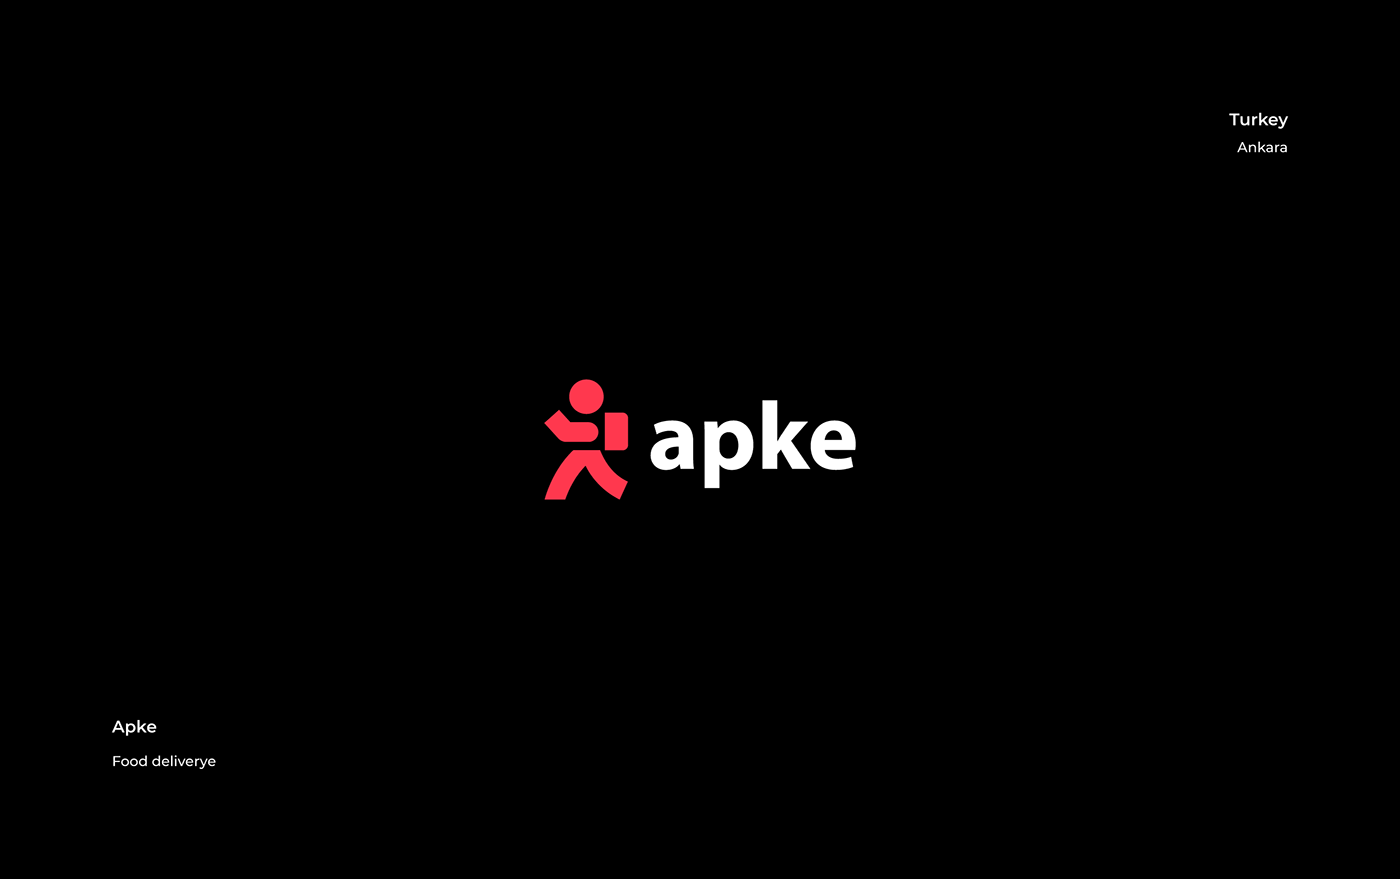 Apke: Very fast food delivery service. It has a large concrete advantage, large stocks of products, 